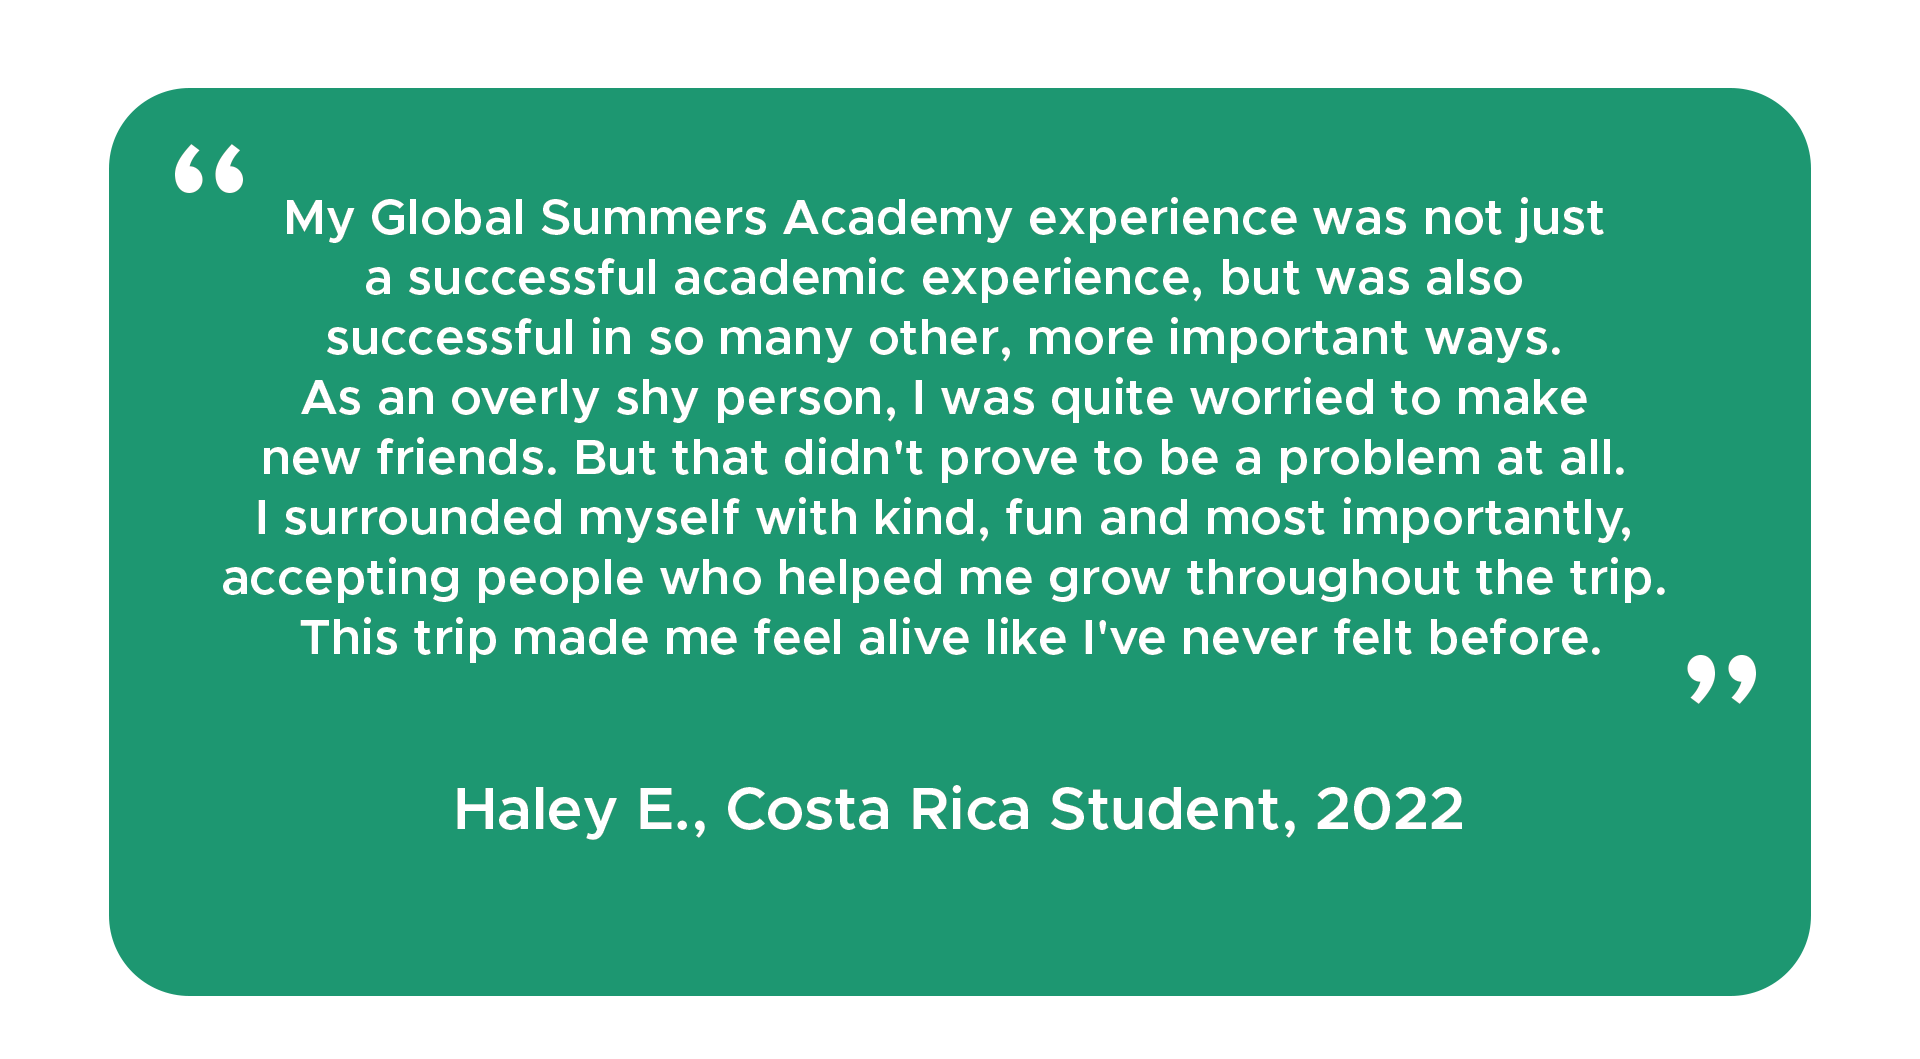 "My Global Summers Academy experience was not just a successful academic experience, but was also successful in so many other, more important ways. As an overly shy person, I was quite worried to make new friends. But that didn't prove to be a problem at all. I surrounded myself with kind, fun and most importantly, accepting people who helped me grow throughout the trip. This trip made me feel alive like I've never felt before." Haley E., Costa Rica student, 2022